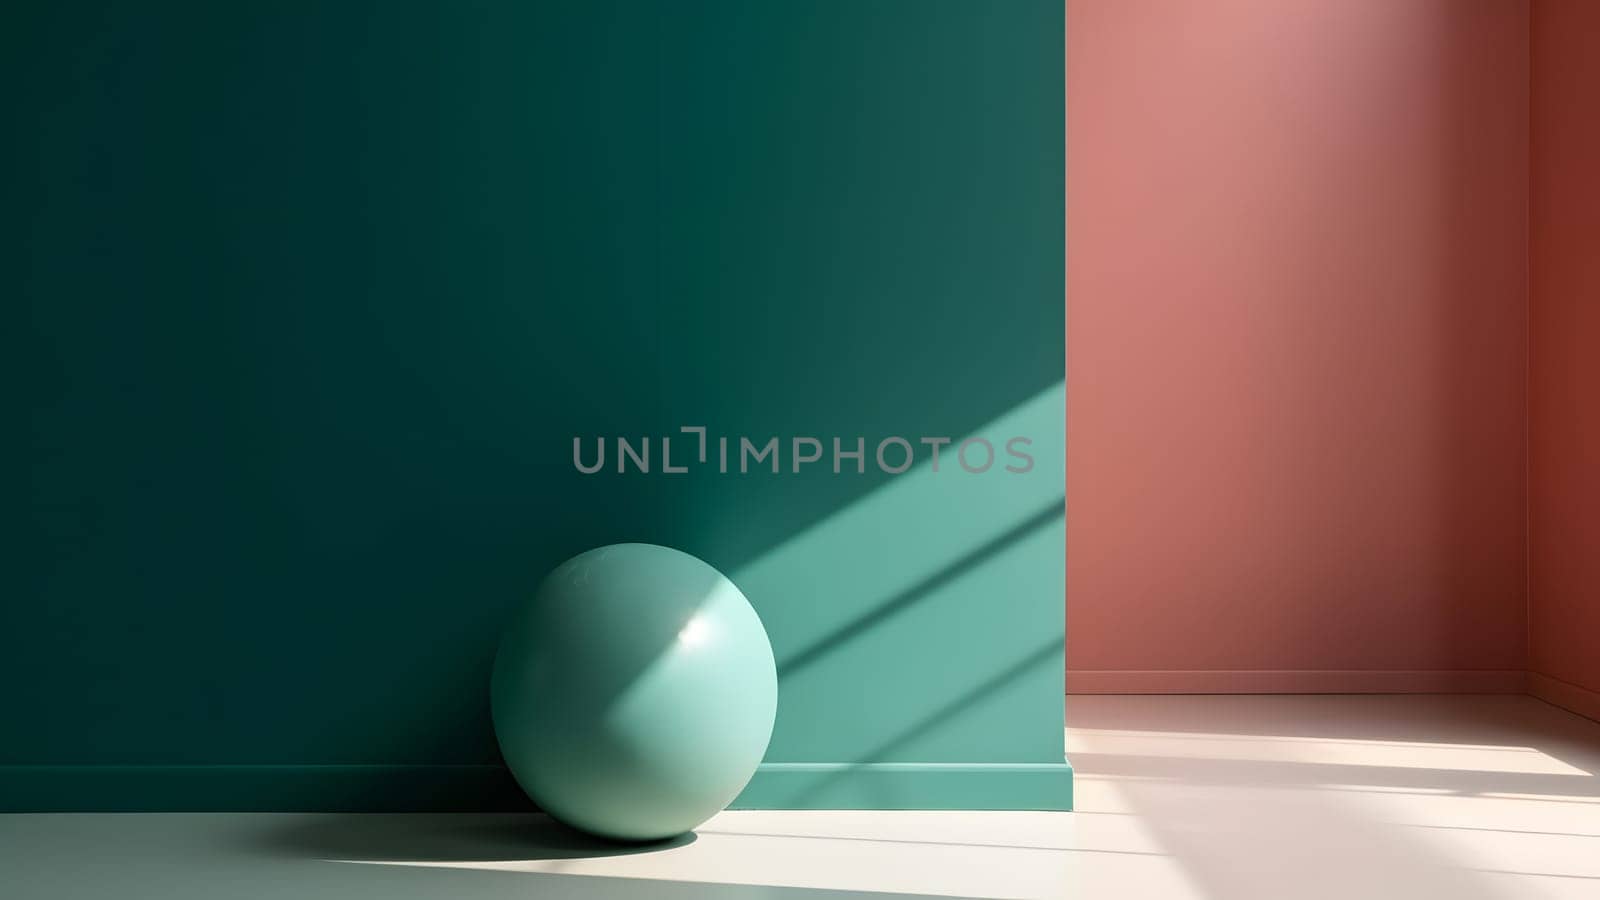 abstract minimalistic composition scene with green gloss ball on white horizontal surface near green wall, neural network generated picture by z1b